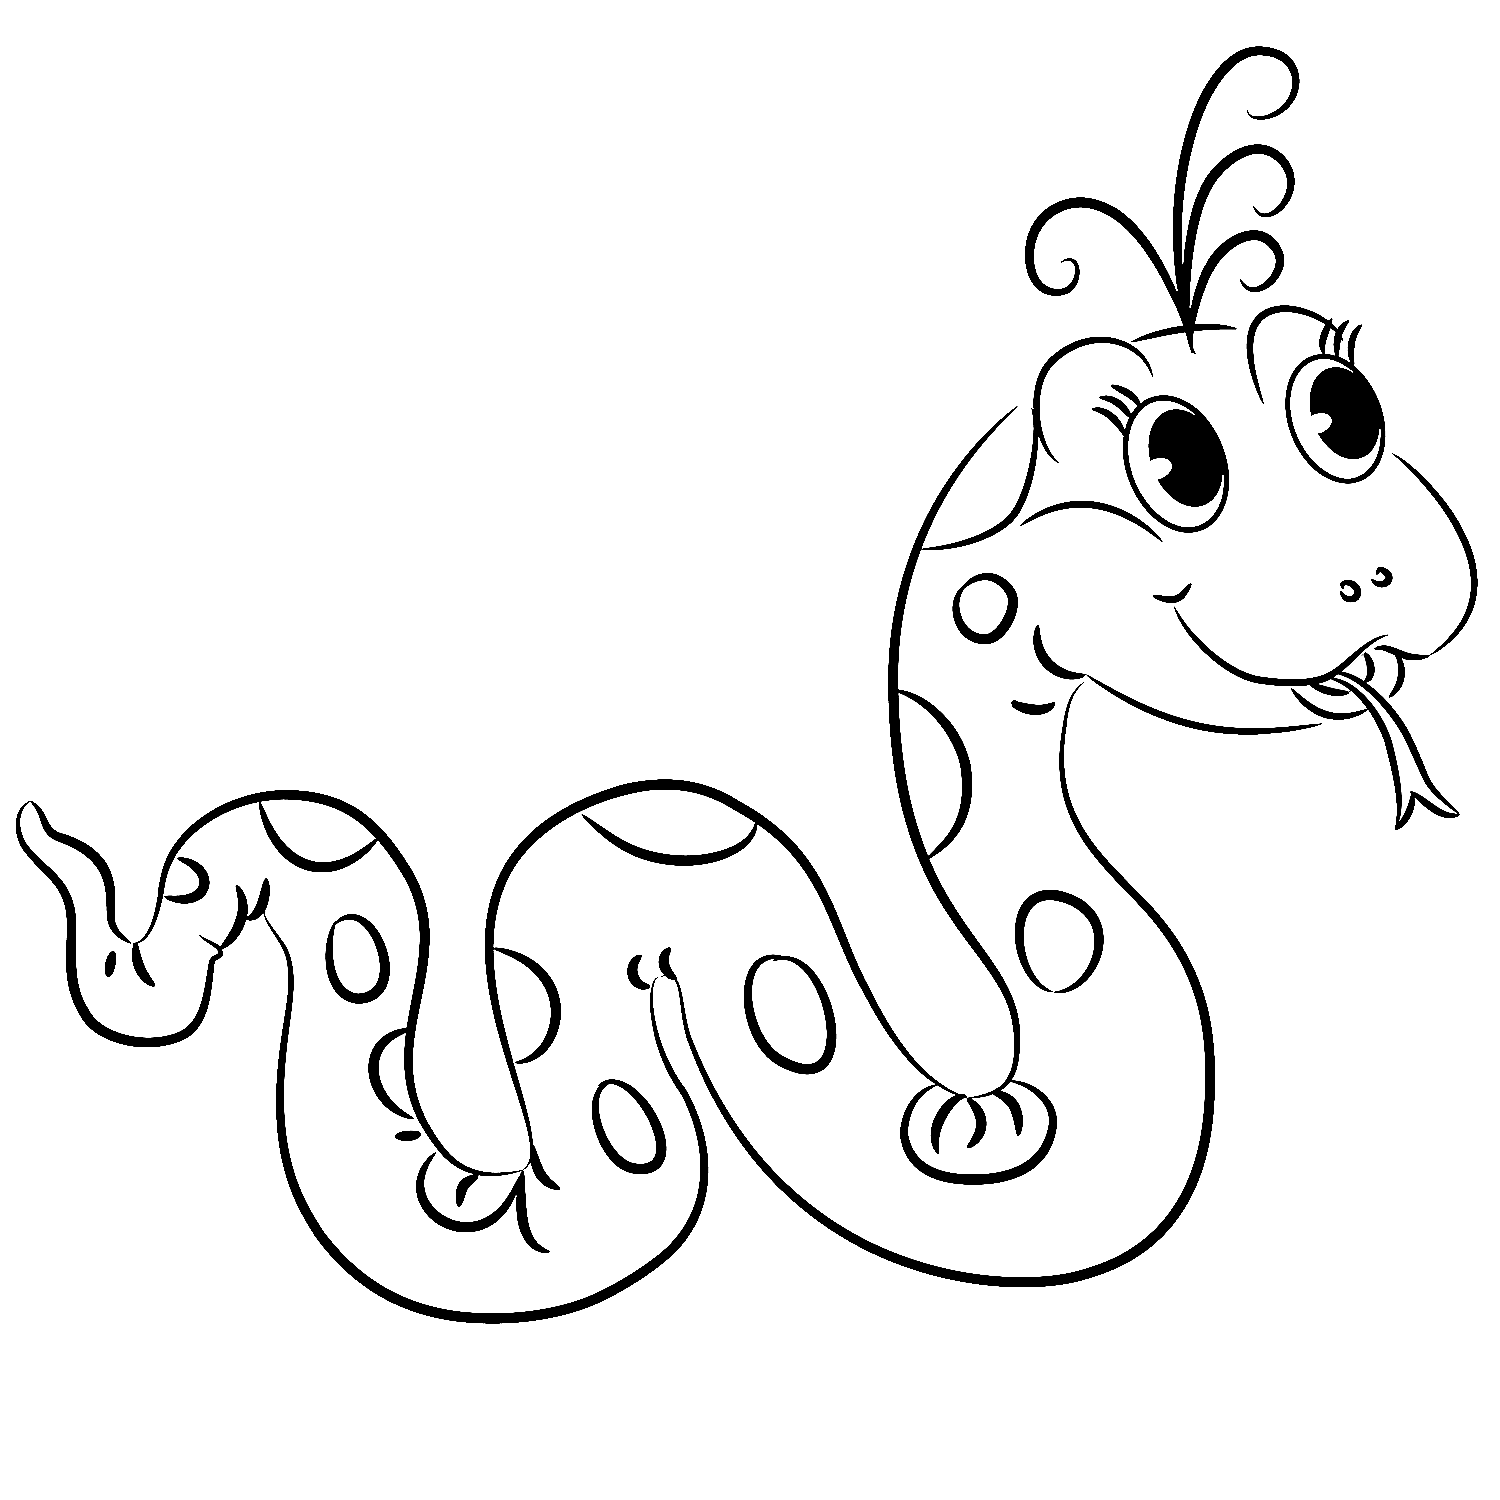 Snake coloring pages to download and print for free